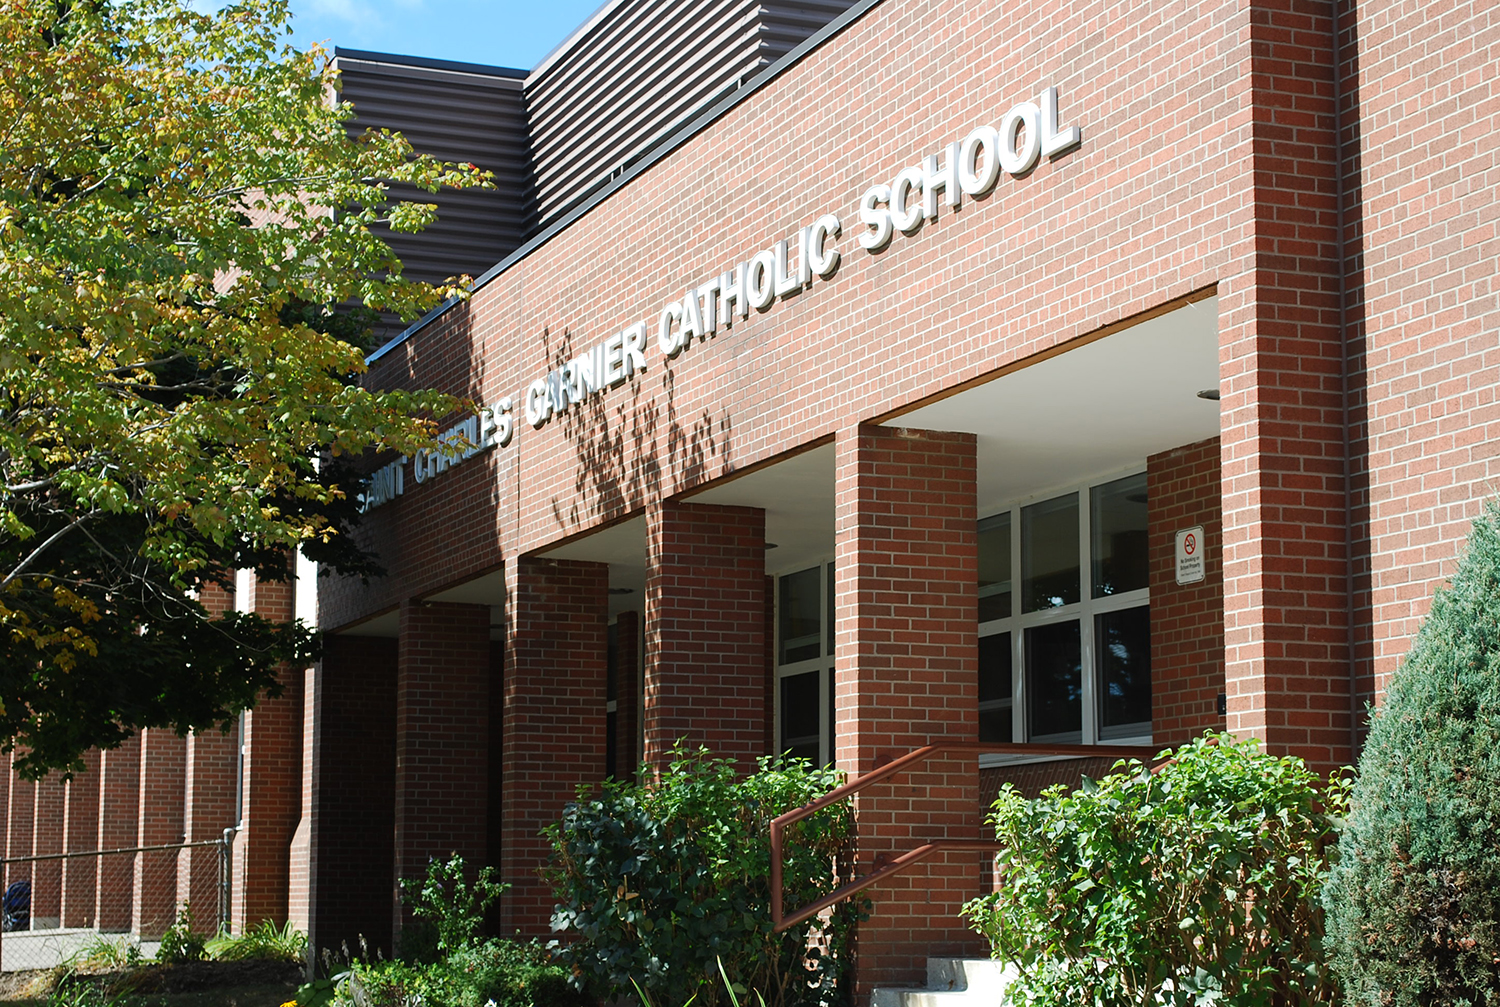 The front of the school building.